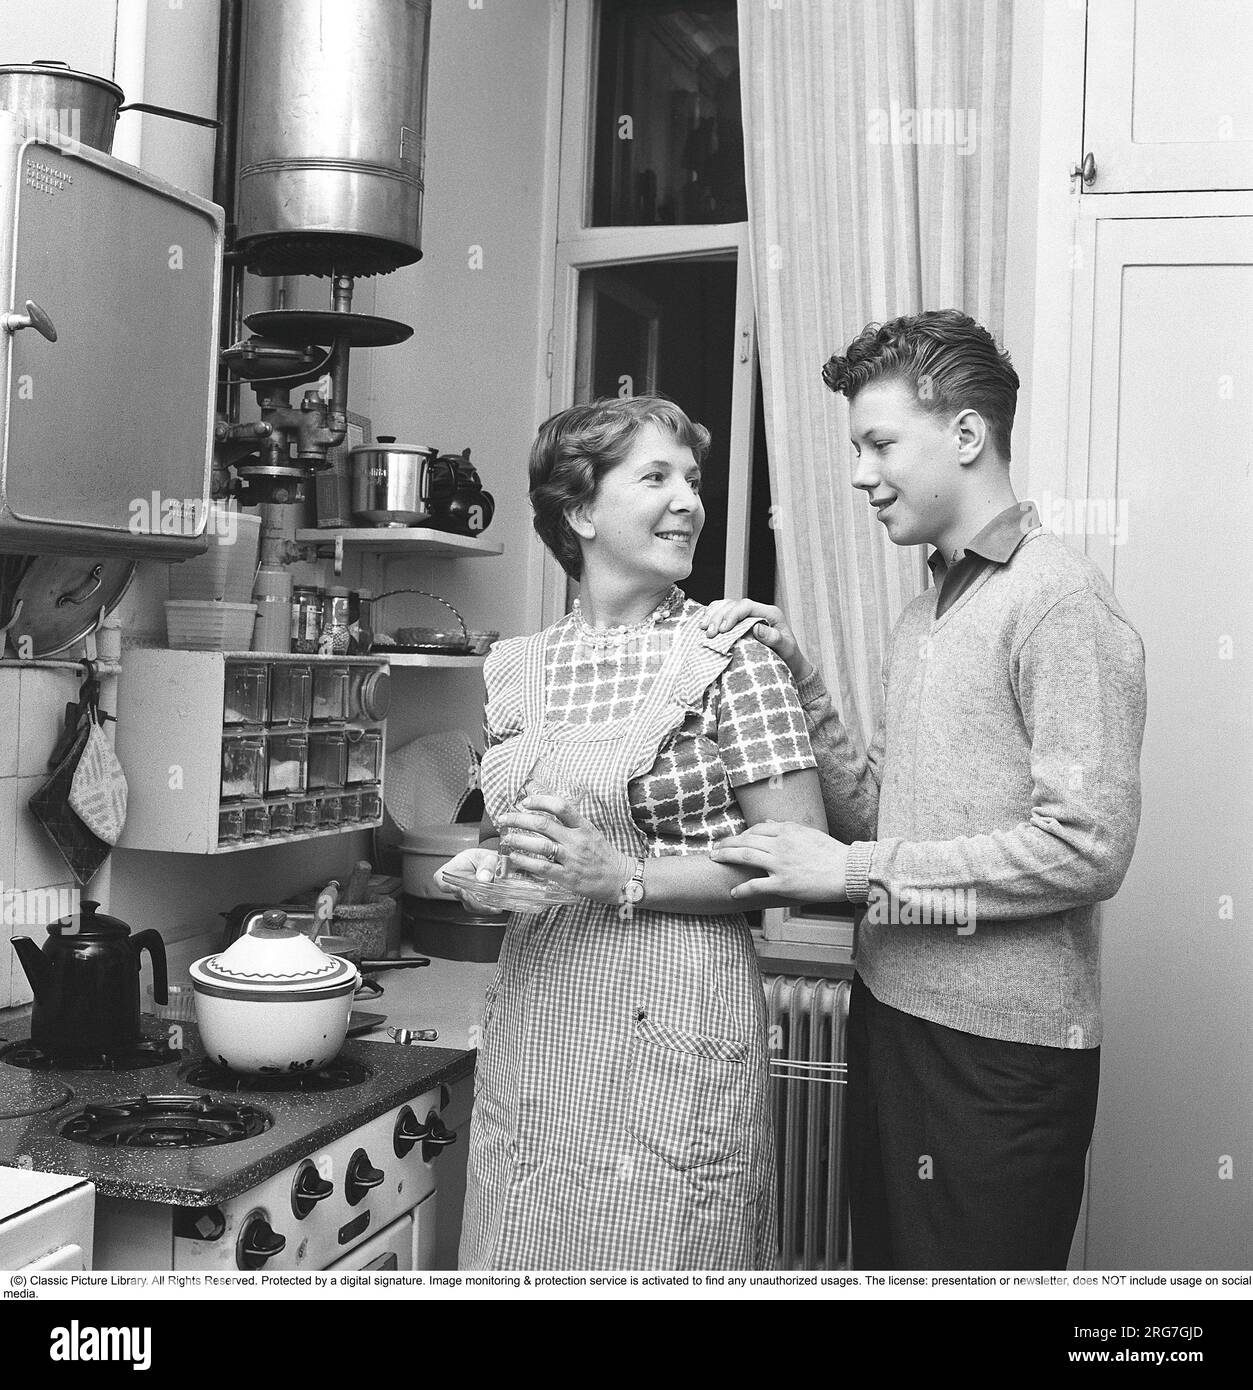 Kitchen in the 1960s. A mother with her son in the kitchen. A small kitchen with a gas stove, a smaller kitchen bench where there is a mortar and bread box. A spice rack hangs on the wall. A water heater hangs at the top of the wall. Sweden 1962. Kristoffersson ref CV90-10 Stock Photo